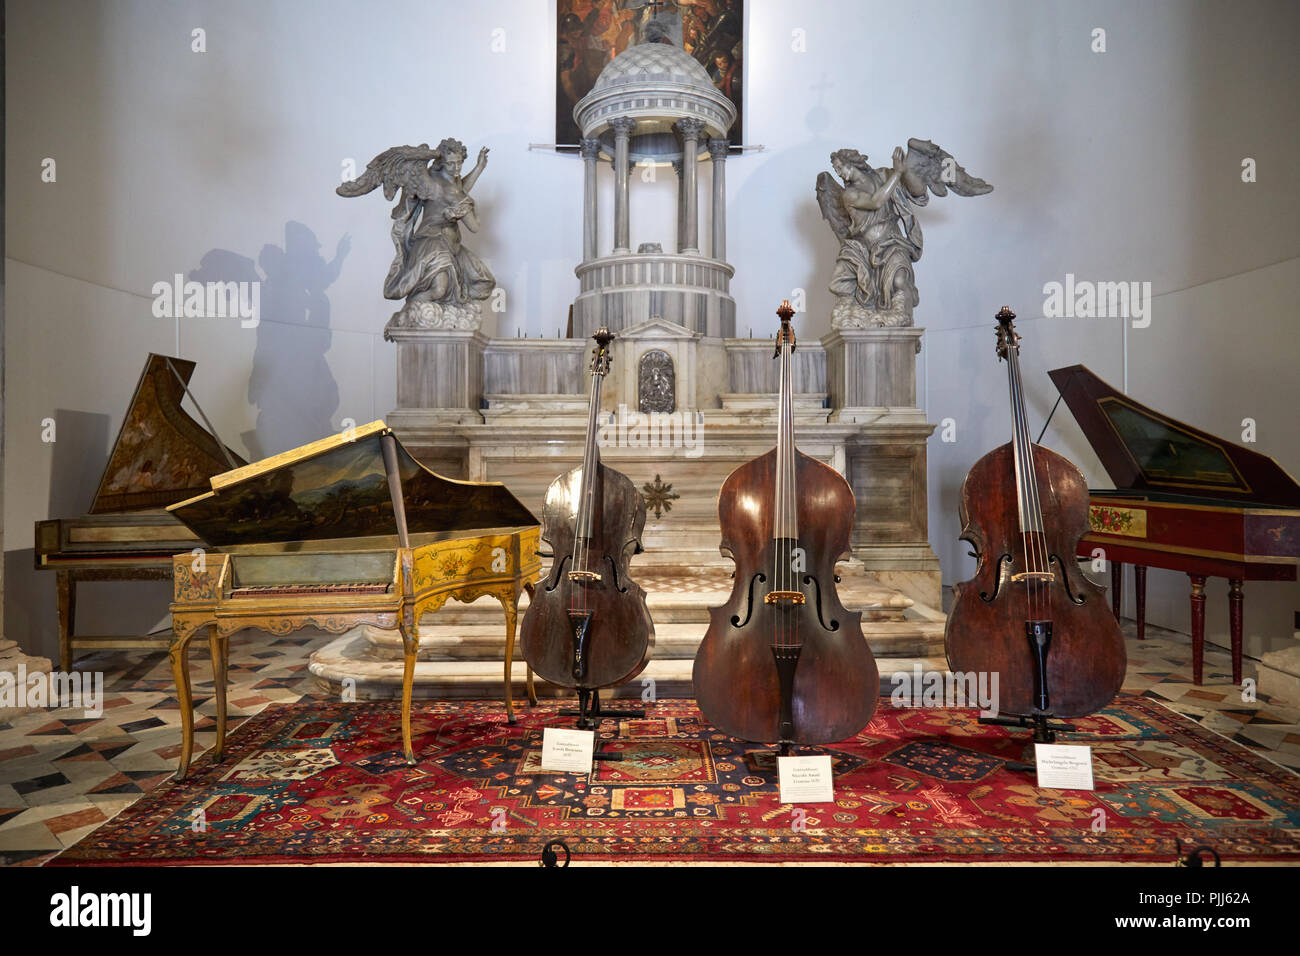 VENICE, ITALY - AUGUST 14, 2017: Ancient Italian string instruments exhibition in San Maurizio church in Venice, Italy Stock Photo